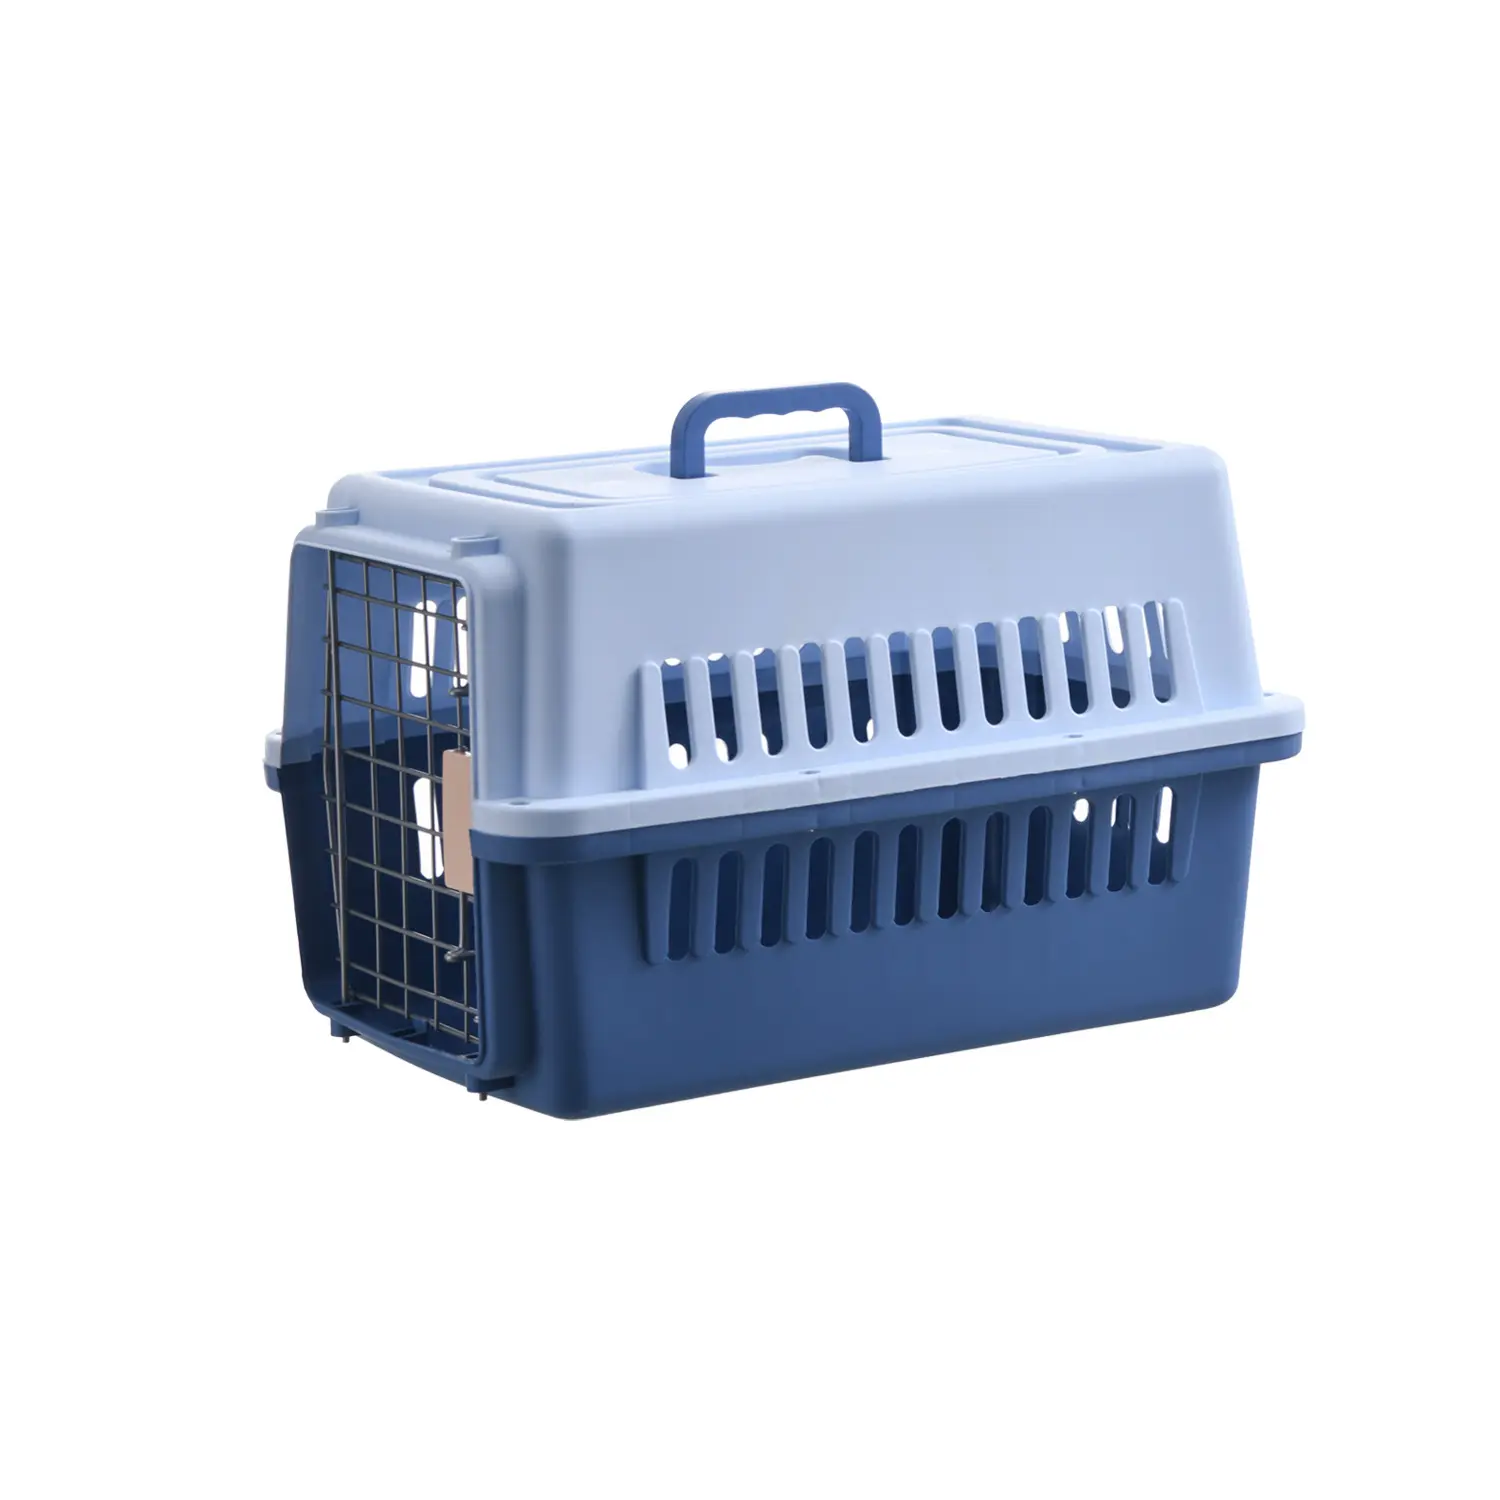 Large air box breathable cat out pet box check box Portable on-board consignment for traveling